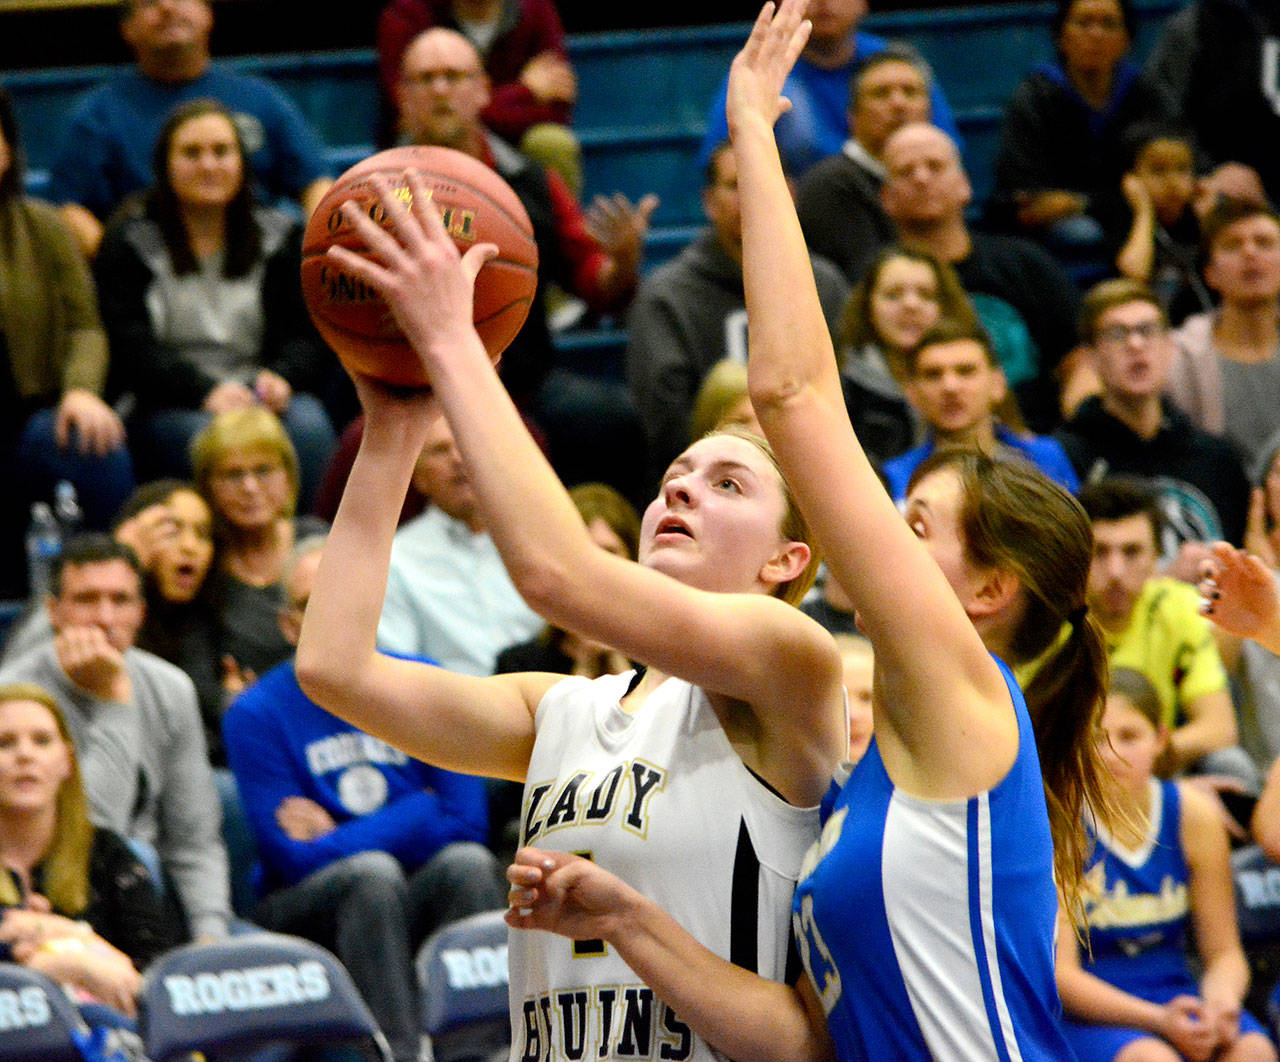 Mark Krulish/Kitsap News Group Clallam Bay’s Miriam Wonderly drives to the basket in the 1B Regionals against Columbia Adventist at Rogers High School in Puyallup on Saturday. Columbia Adventist won 52-43, ending the Bruins’ season.